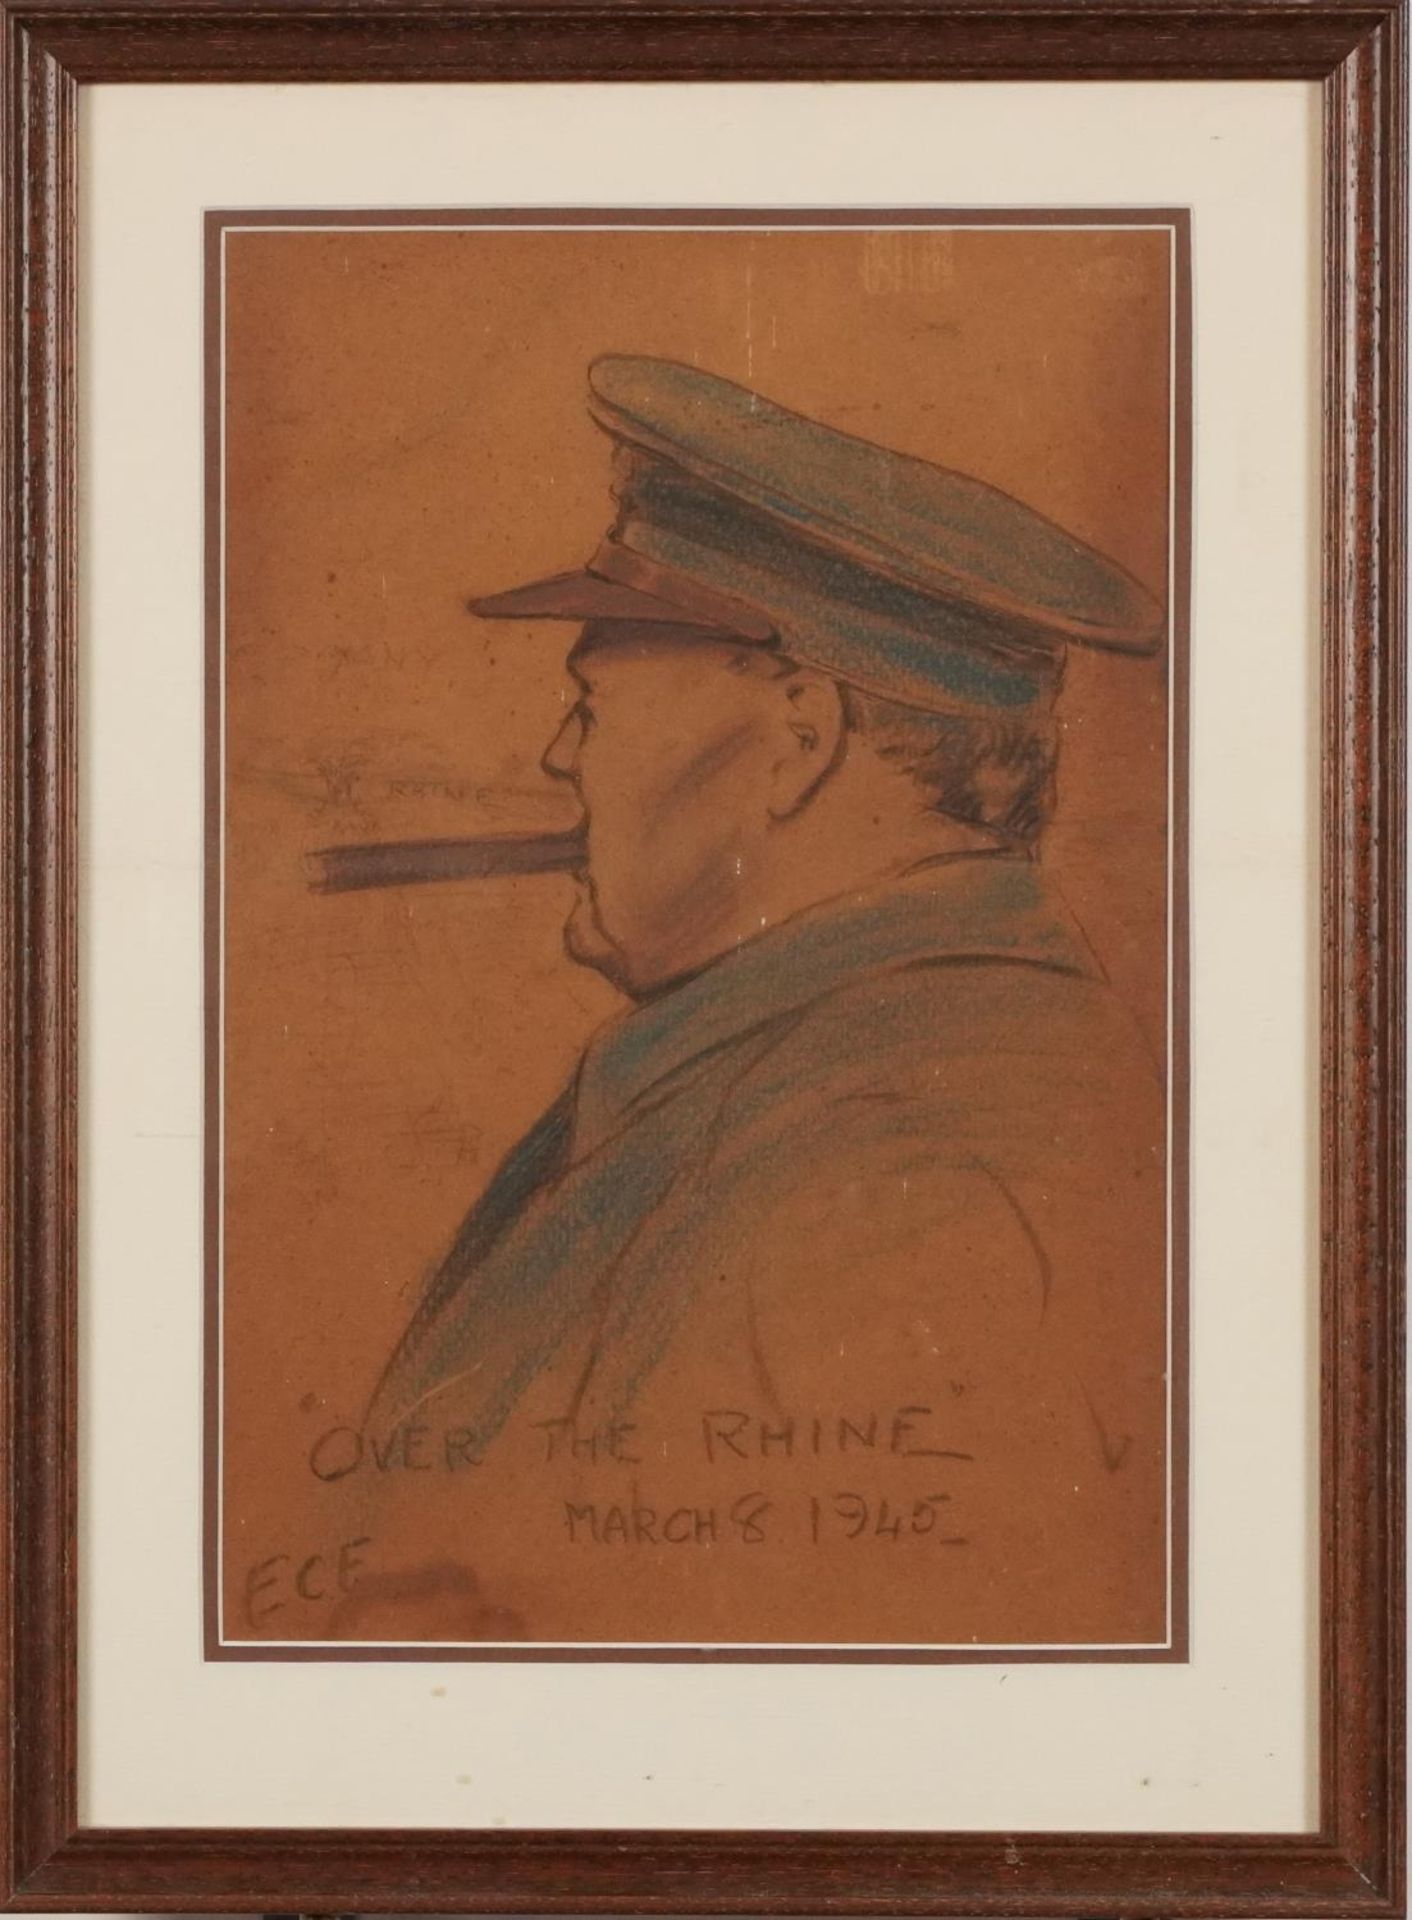 E C F - Winston Churchill, Over the Rhine, March 8th 1945, charcoal and crayon sketch, mounted and - Bild 2 aus 5